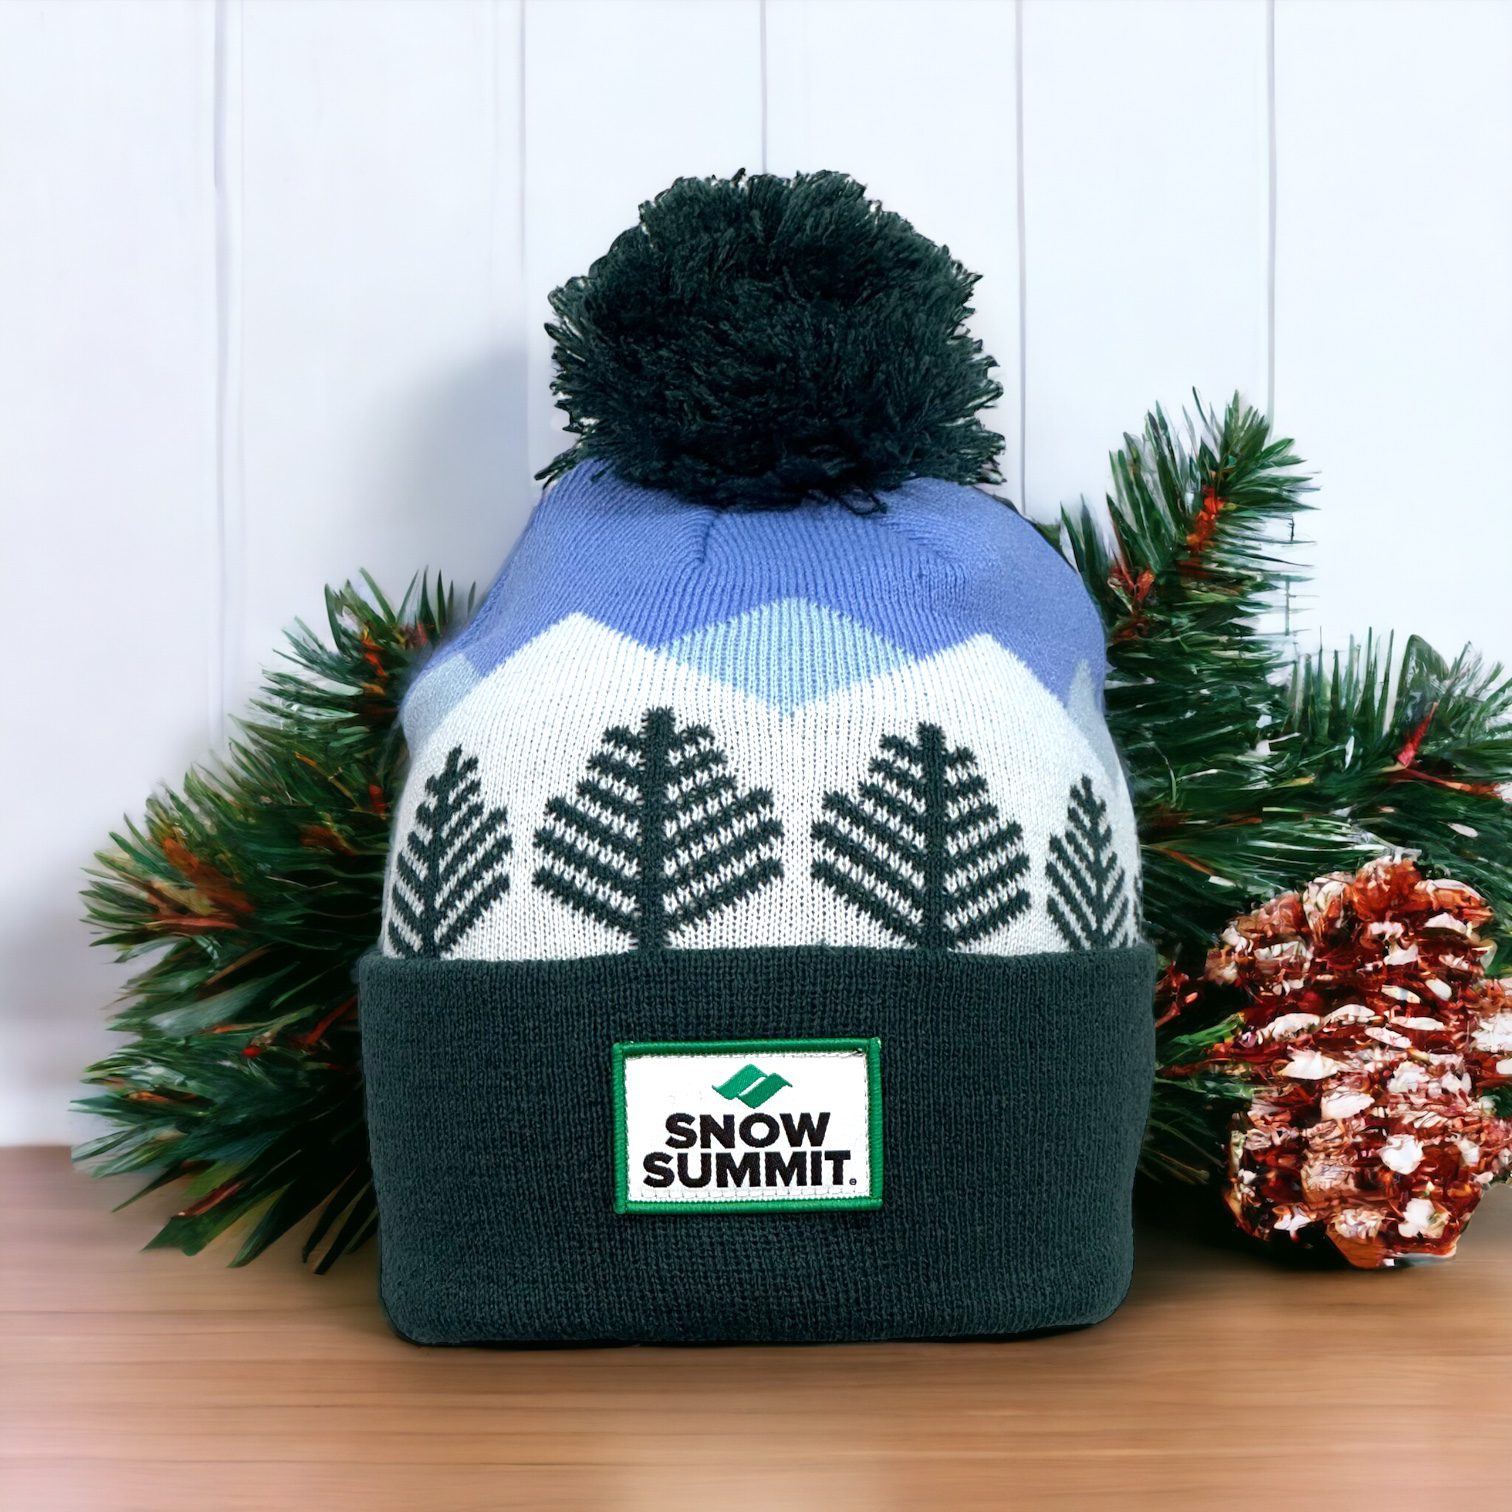 Beanie portraying stitching of trees and a blue stitched sky with snow summit logo patch on cuff of beanie and dark green pom pom on top.